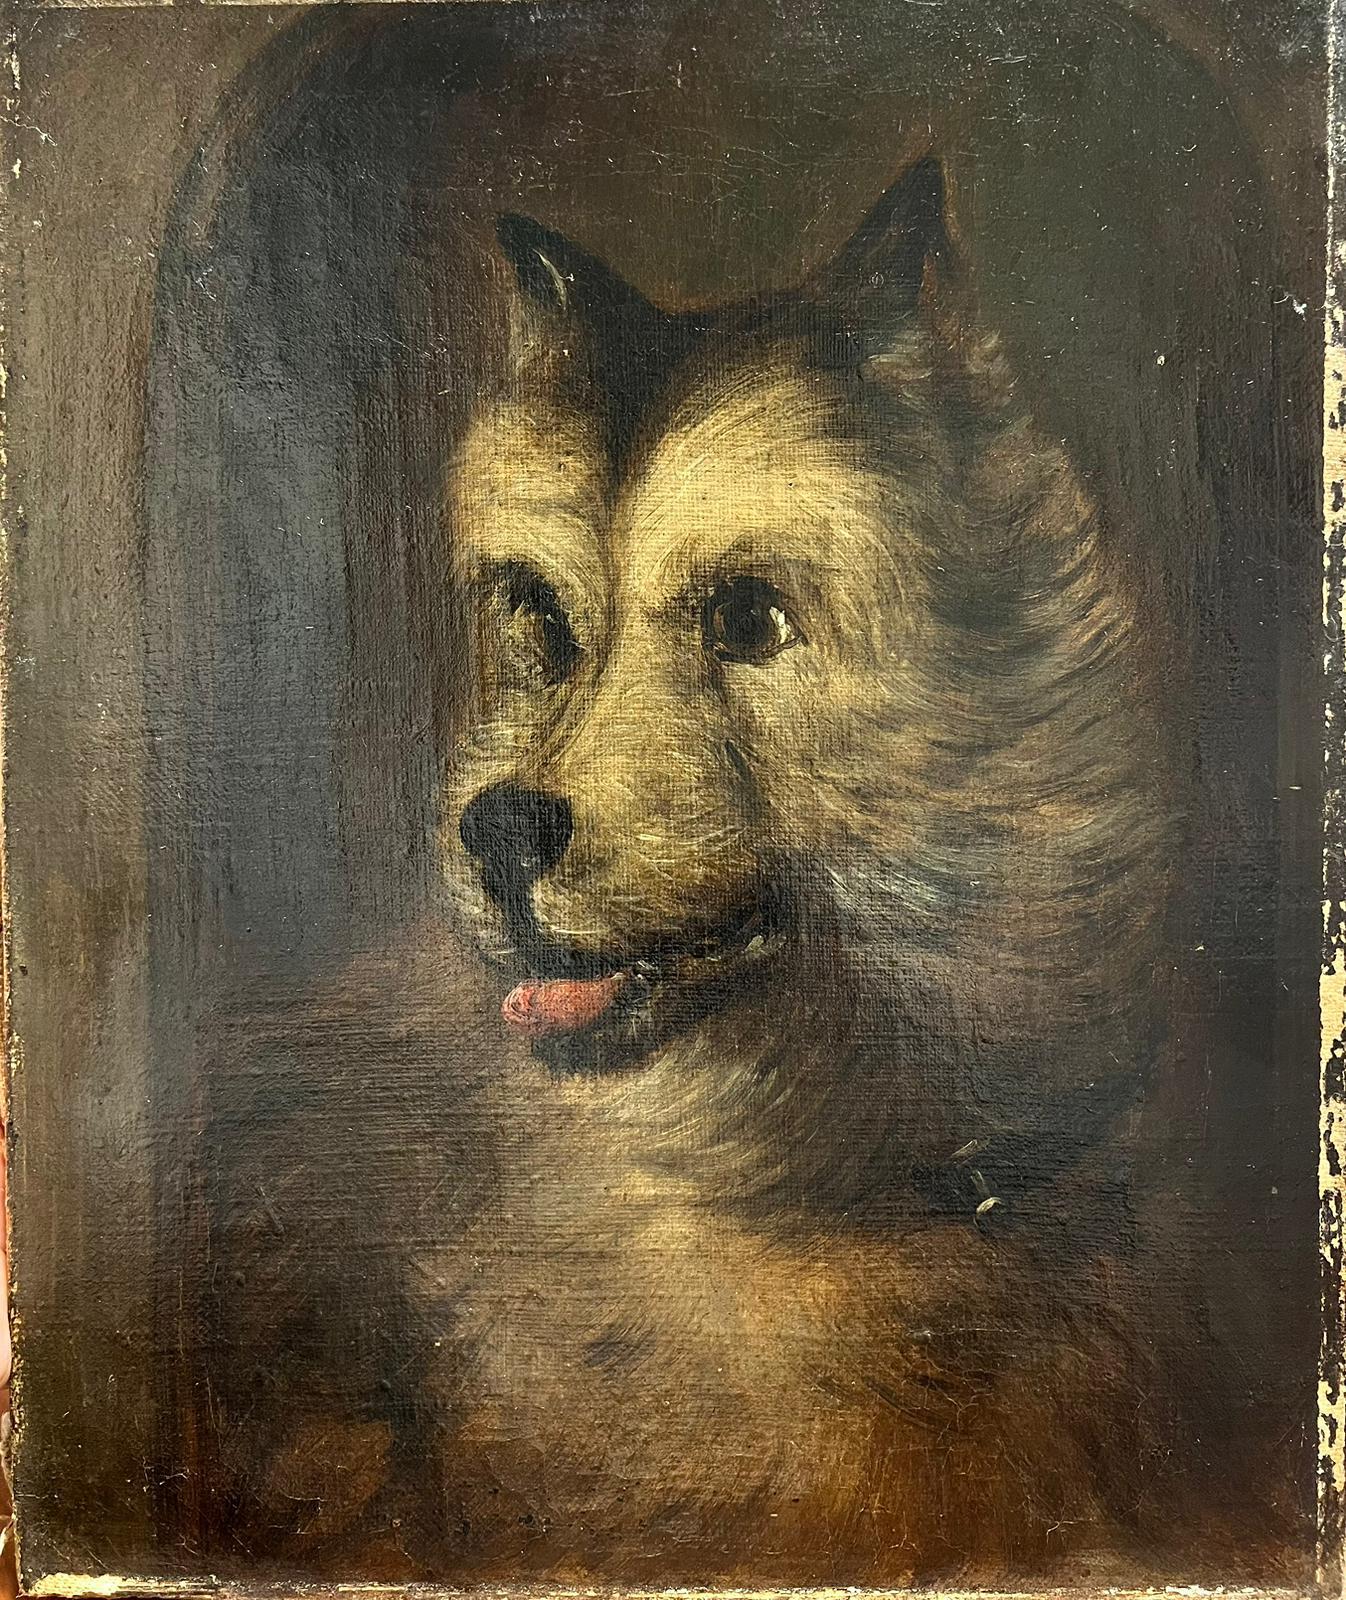 Head Portrait of a Terrier Dog
by W. Mitchell (English, late 19th Century)
oil on canvas, unframed
canvas: 12 x 10 inches
provenance: private collection, UK
condition: very good and sound condition - small paint loss around the wedges where a frame